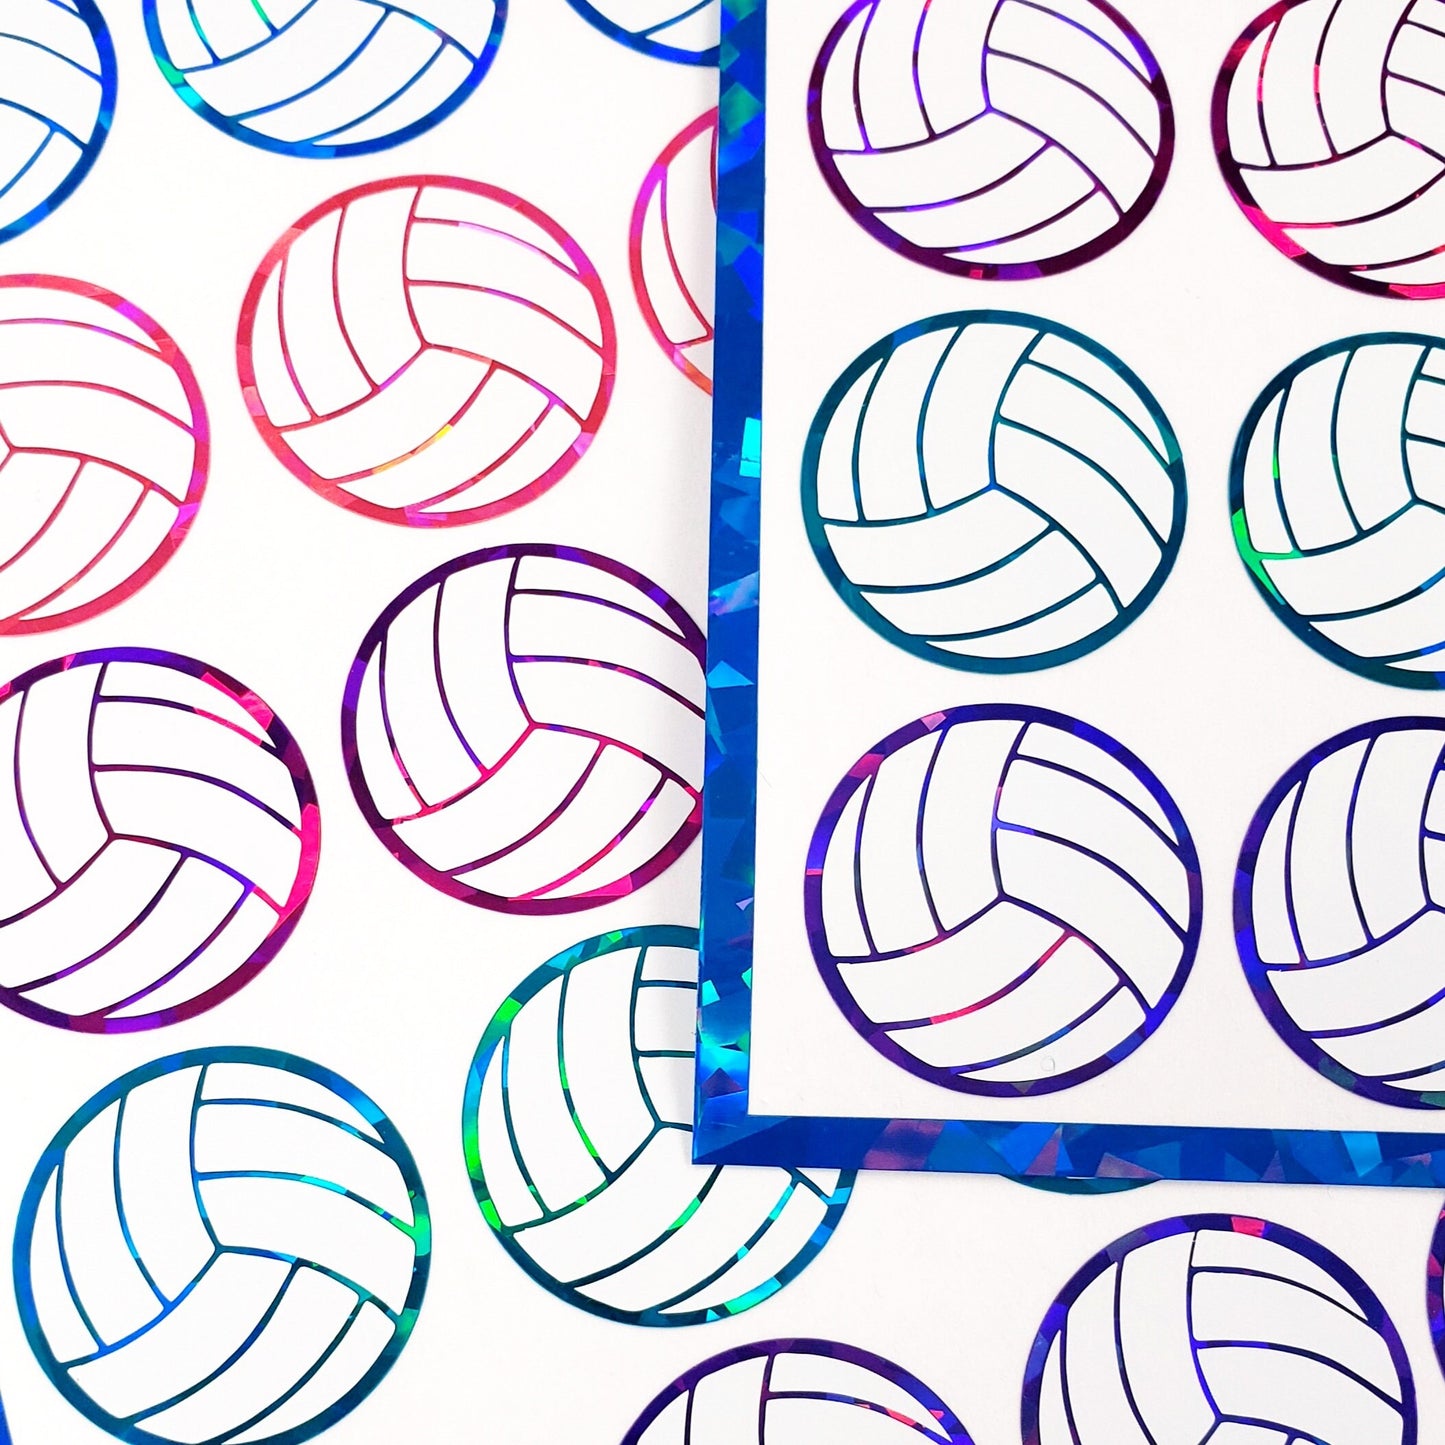 Volleyball Stickers, set of 48 white and multi color sparkly stickers for kids team sports, volleyball birthday party decor, waterproof.